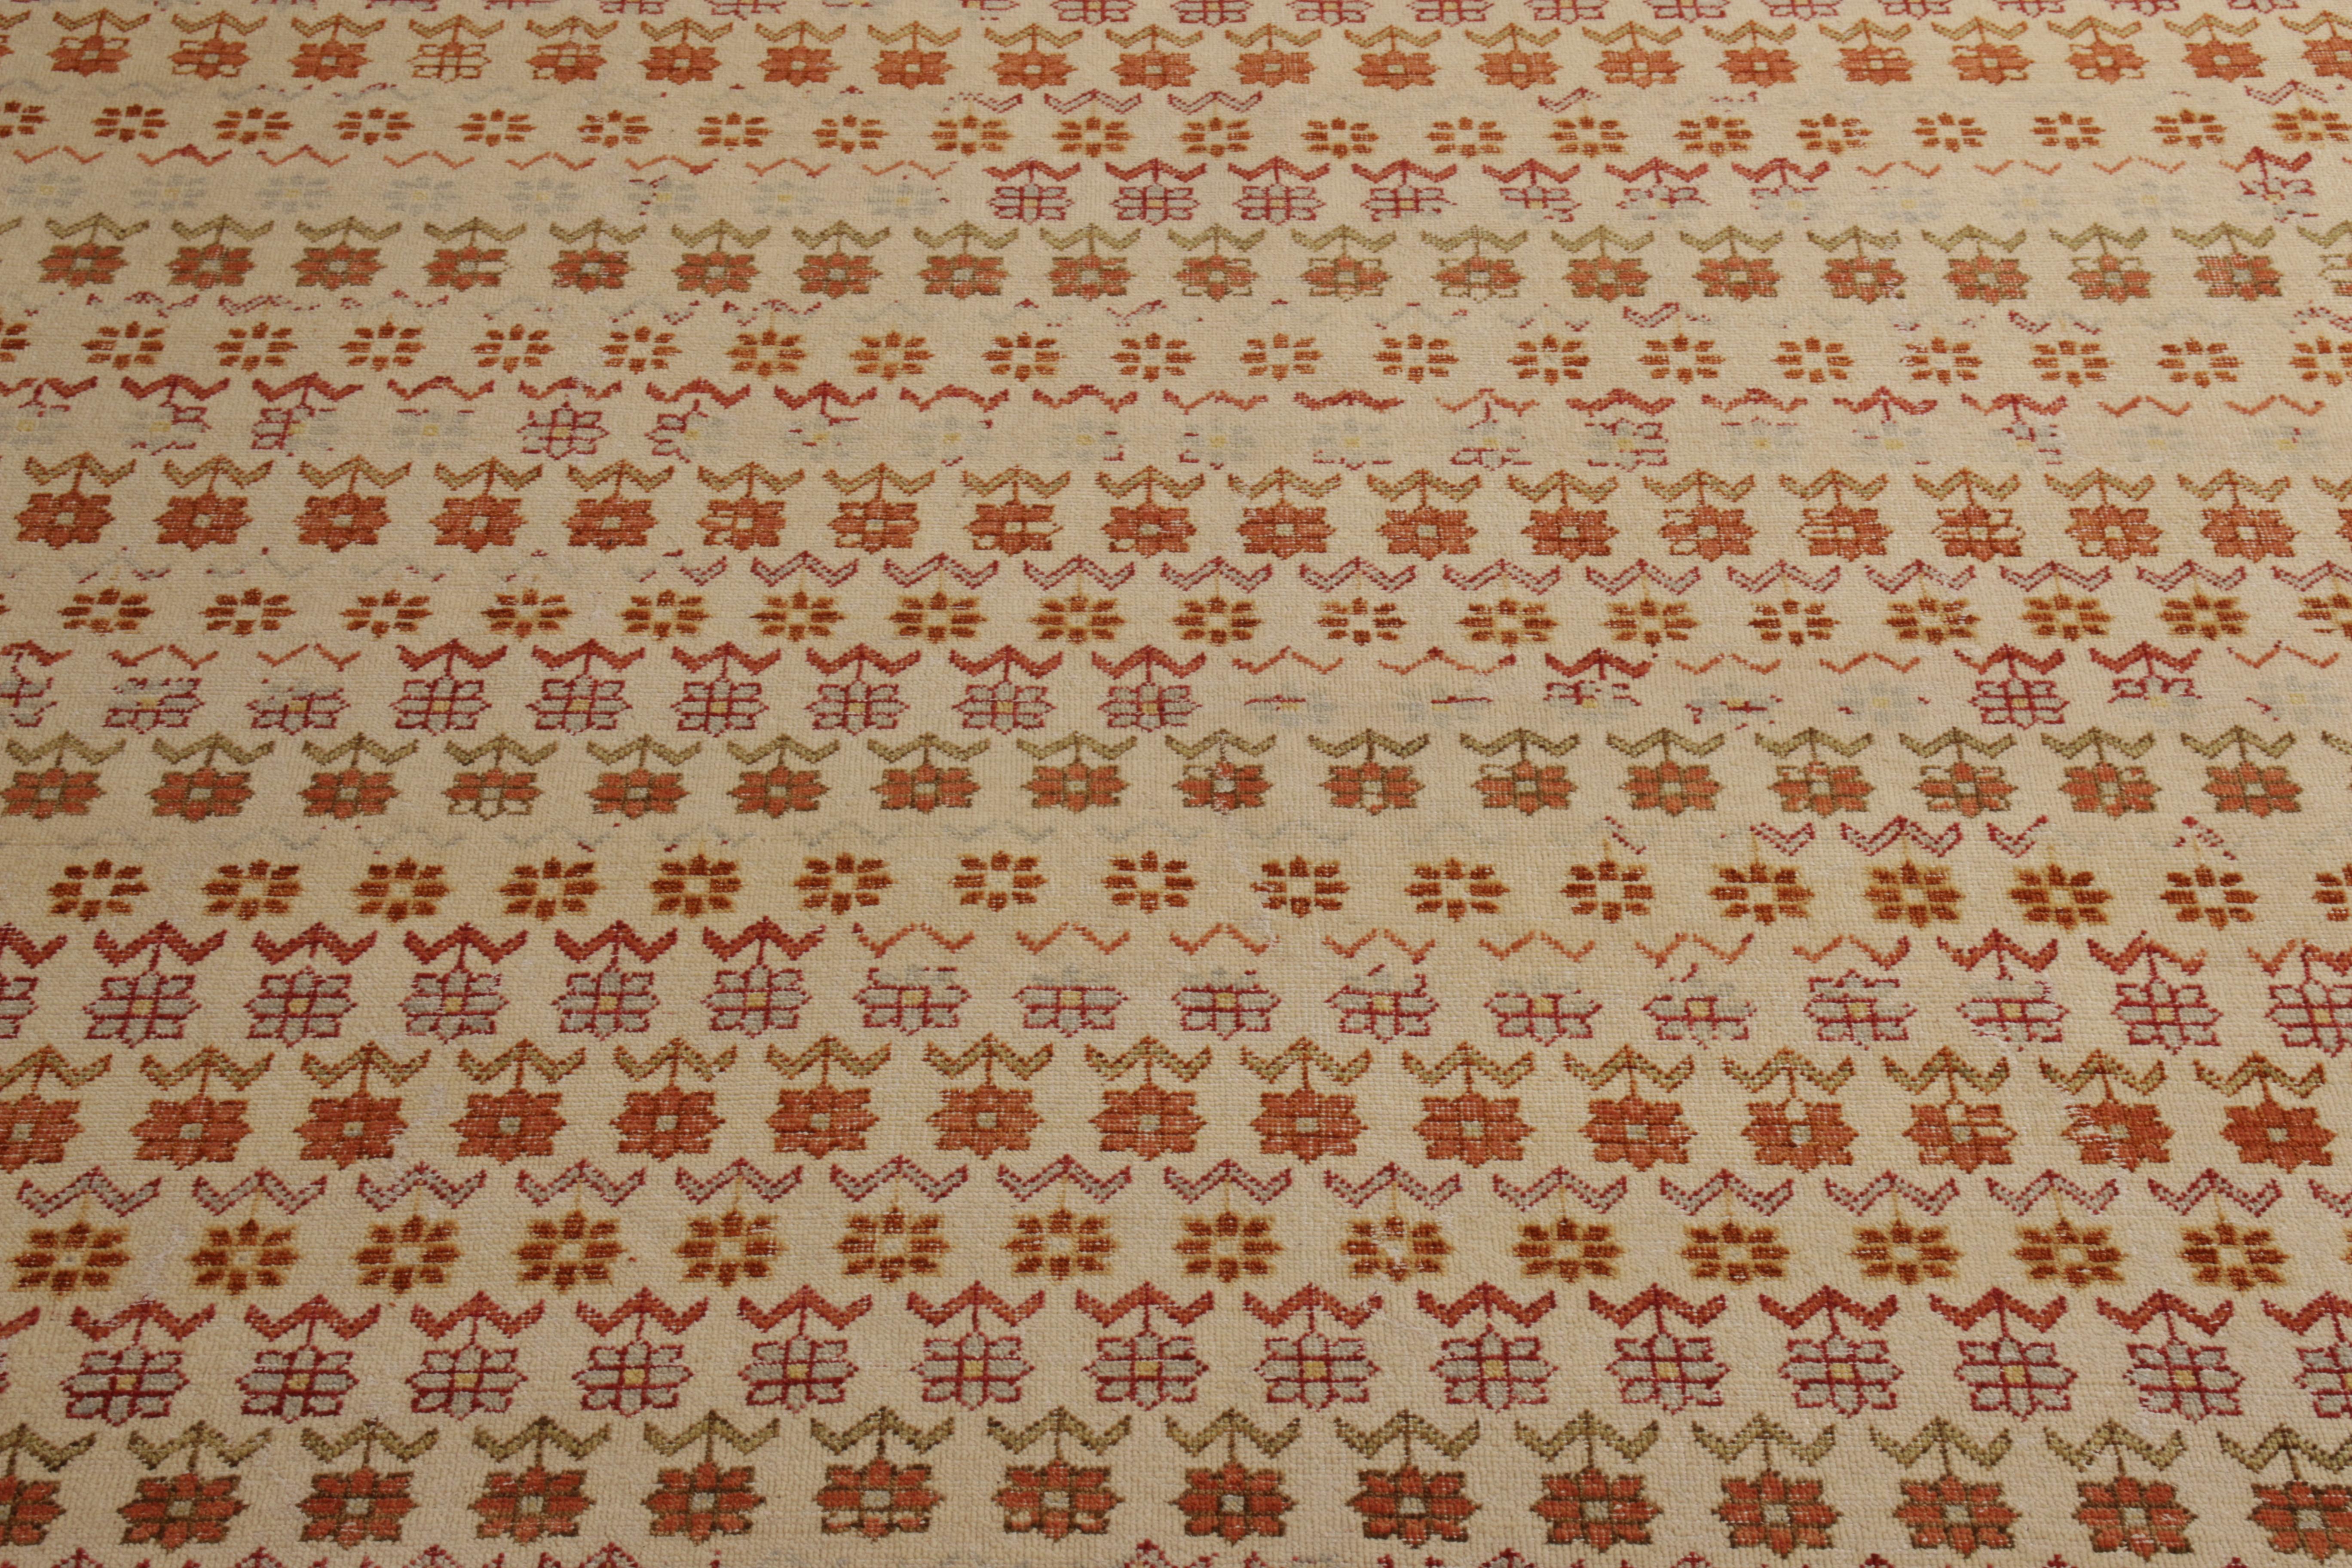 Indian Rug & Kilim's Hand Knotted Agra Style Rug Beige Brown Striped Floral Pattern